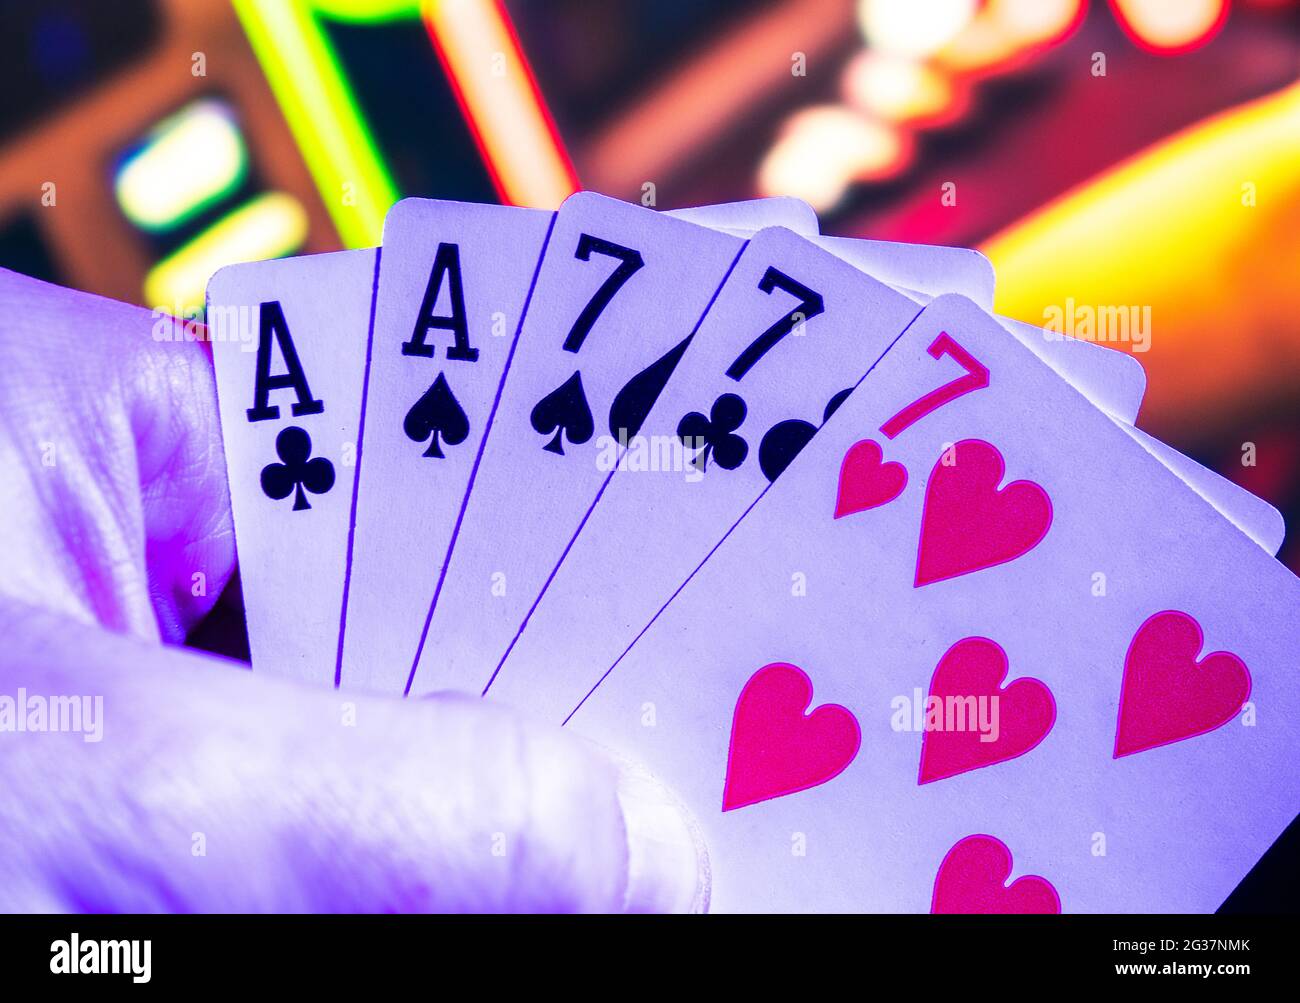 Full House in Poker Game. Gaming Cards in Gamblers Hand. Stock Photo